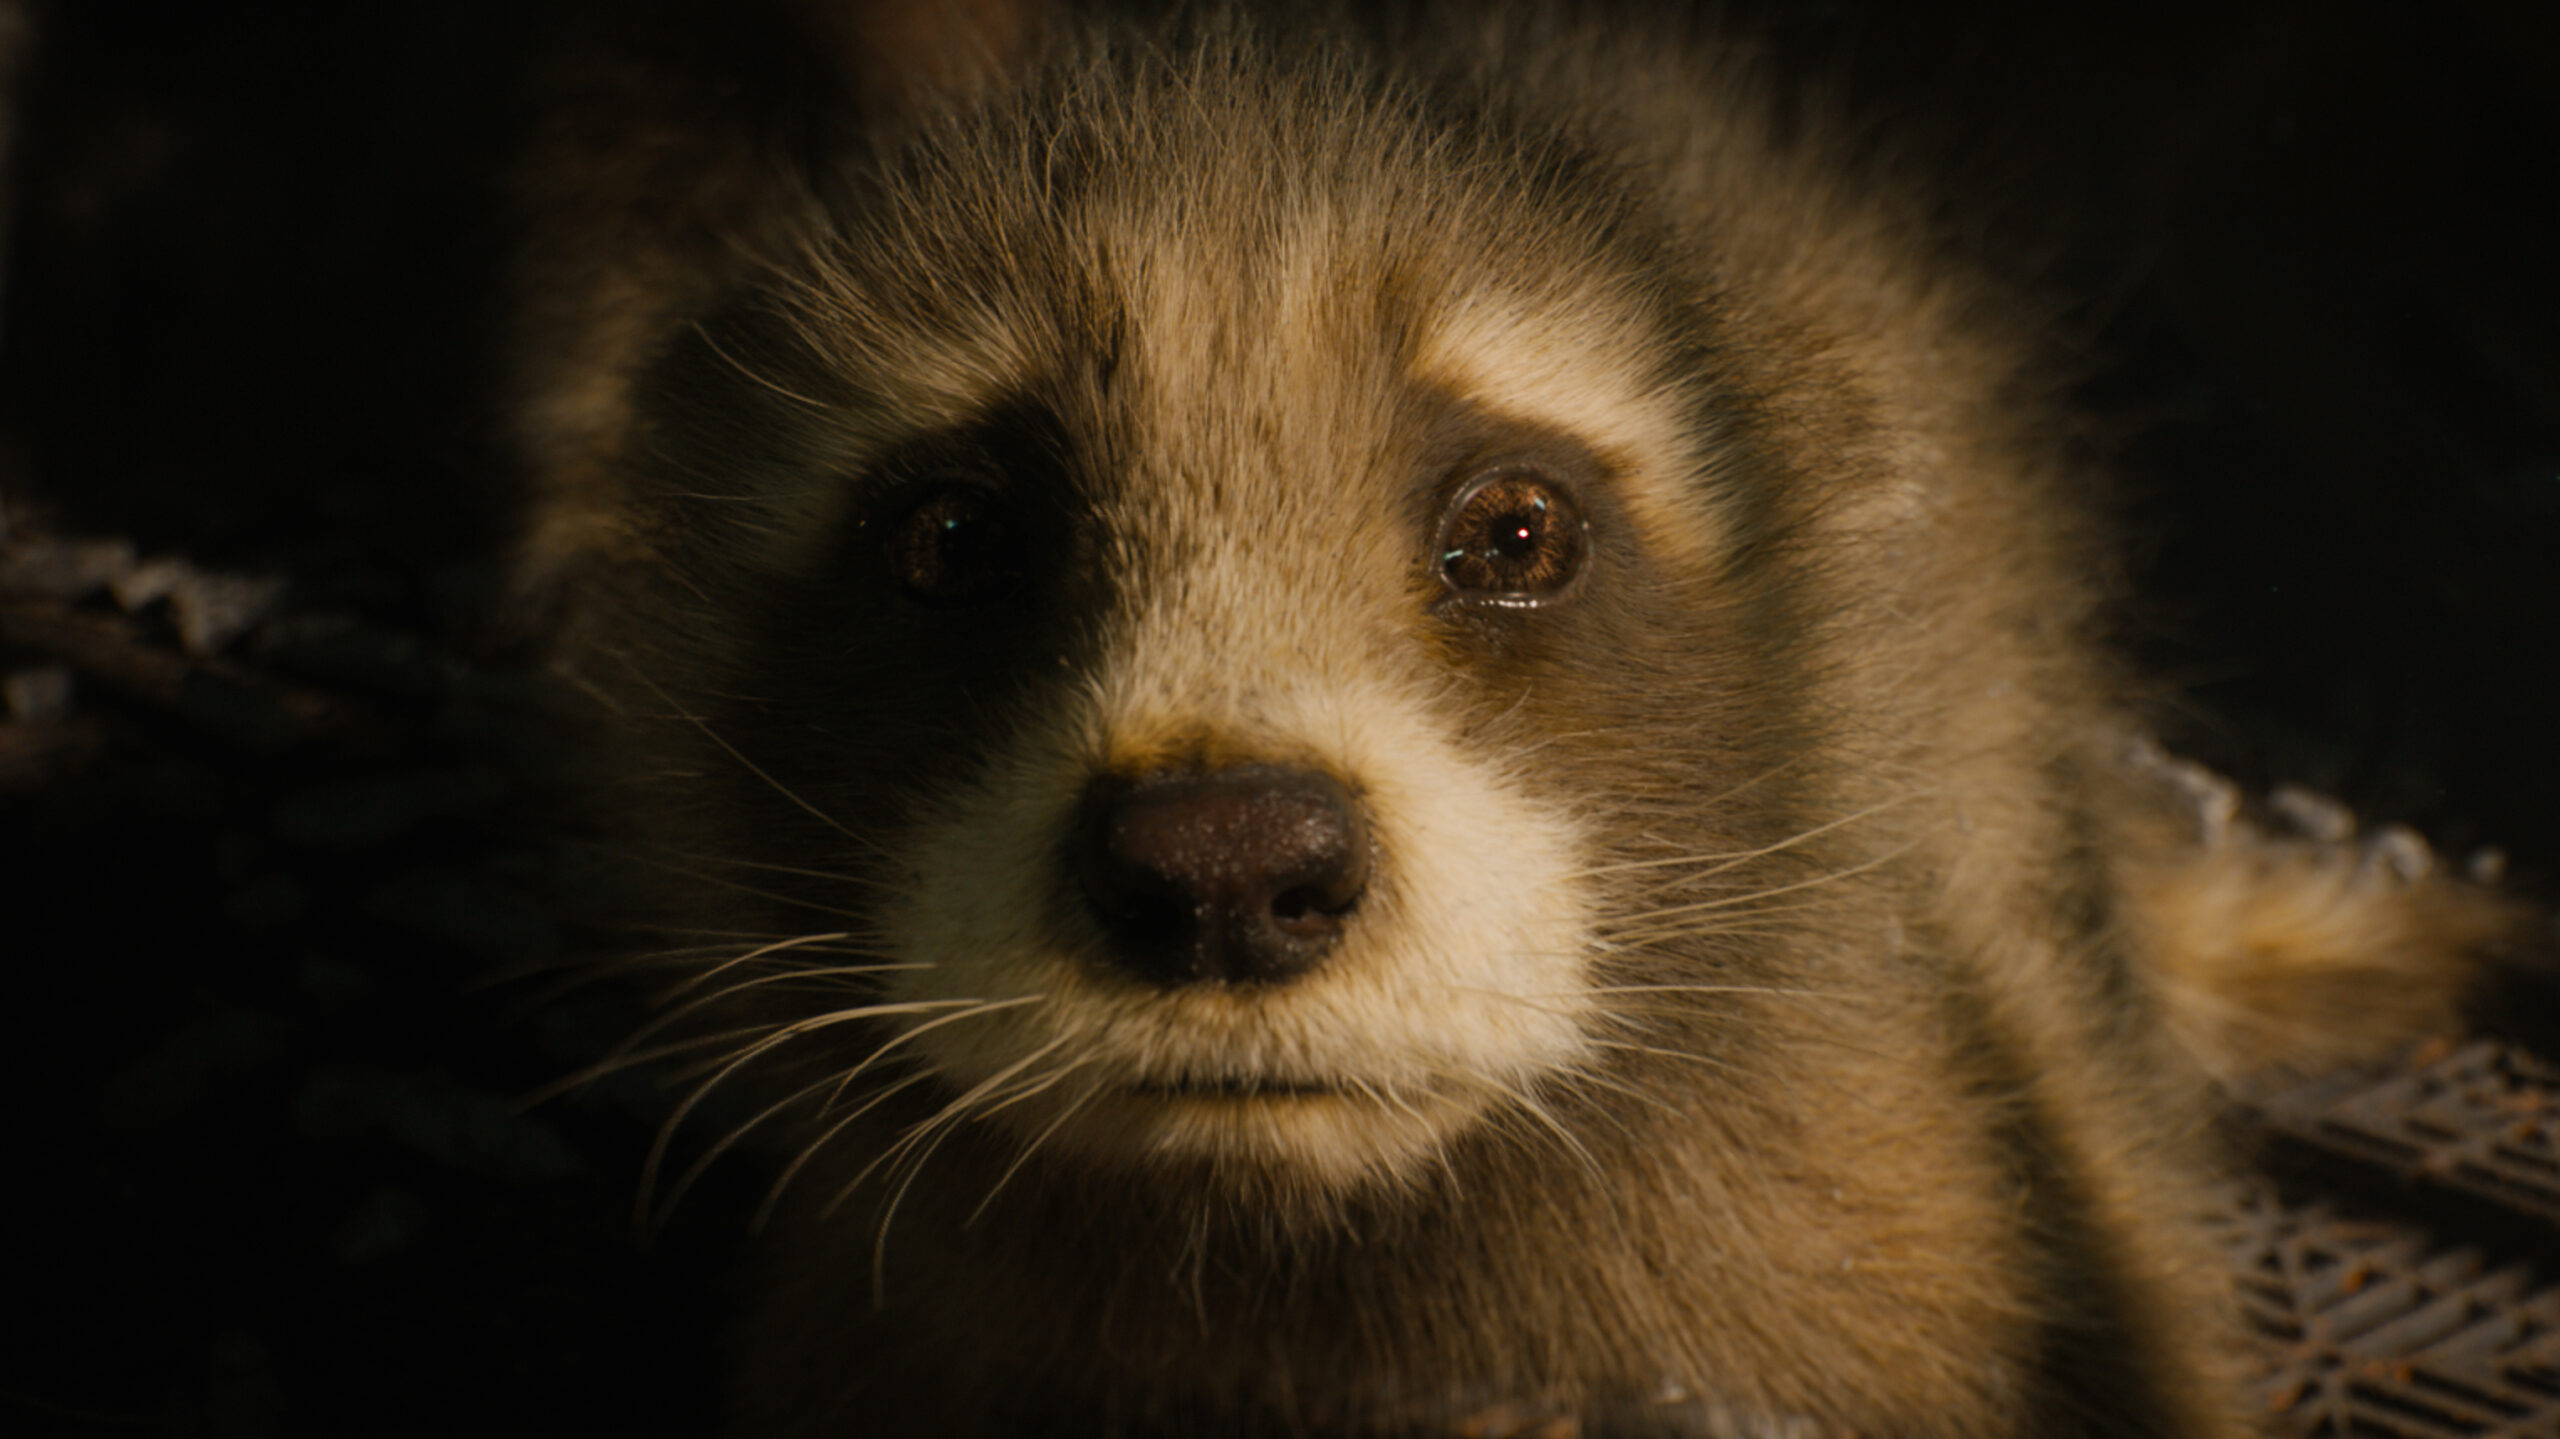 Baby Rocket (voiced by Bradley Cooper) in Marvel Studios' Guardians of the Galaxy Vol. 3. Photo courtesy of Marvel Studios. © 2023 MARVEL.